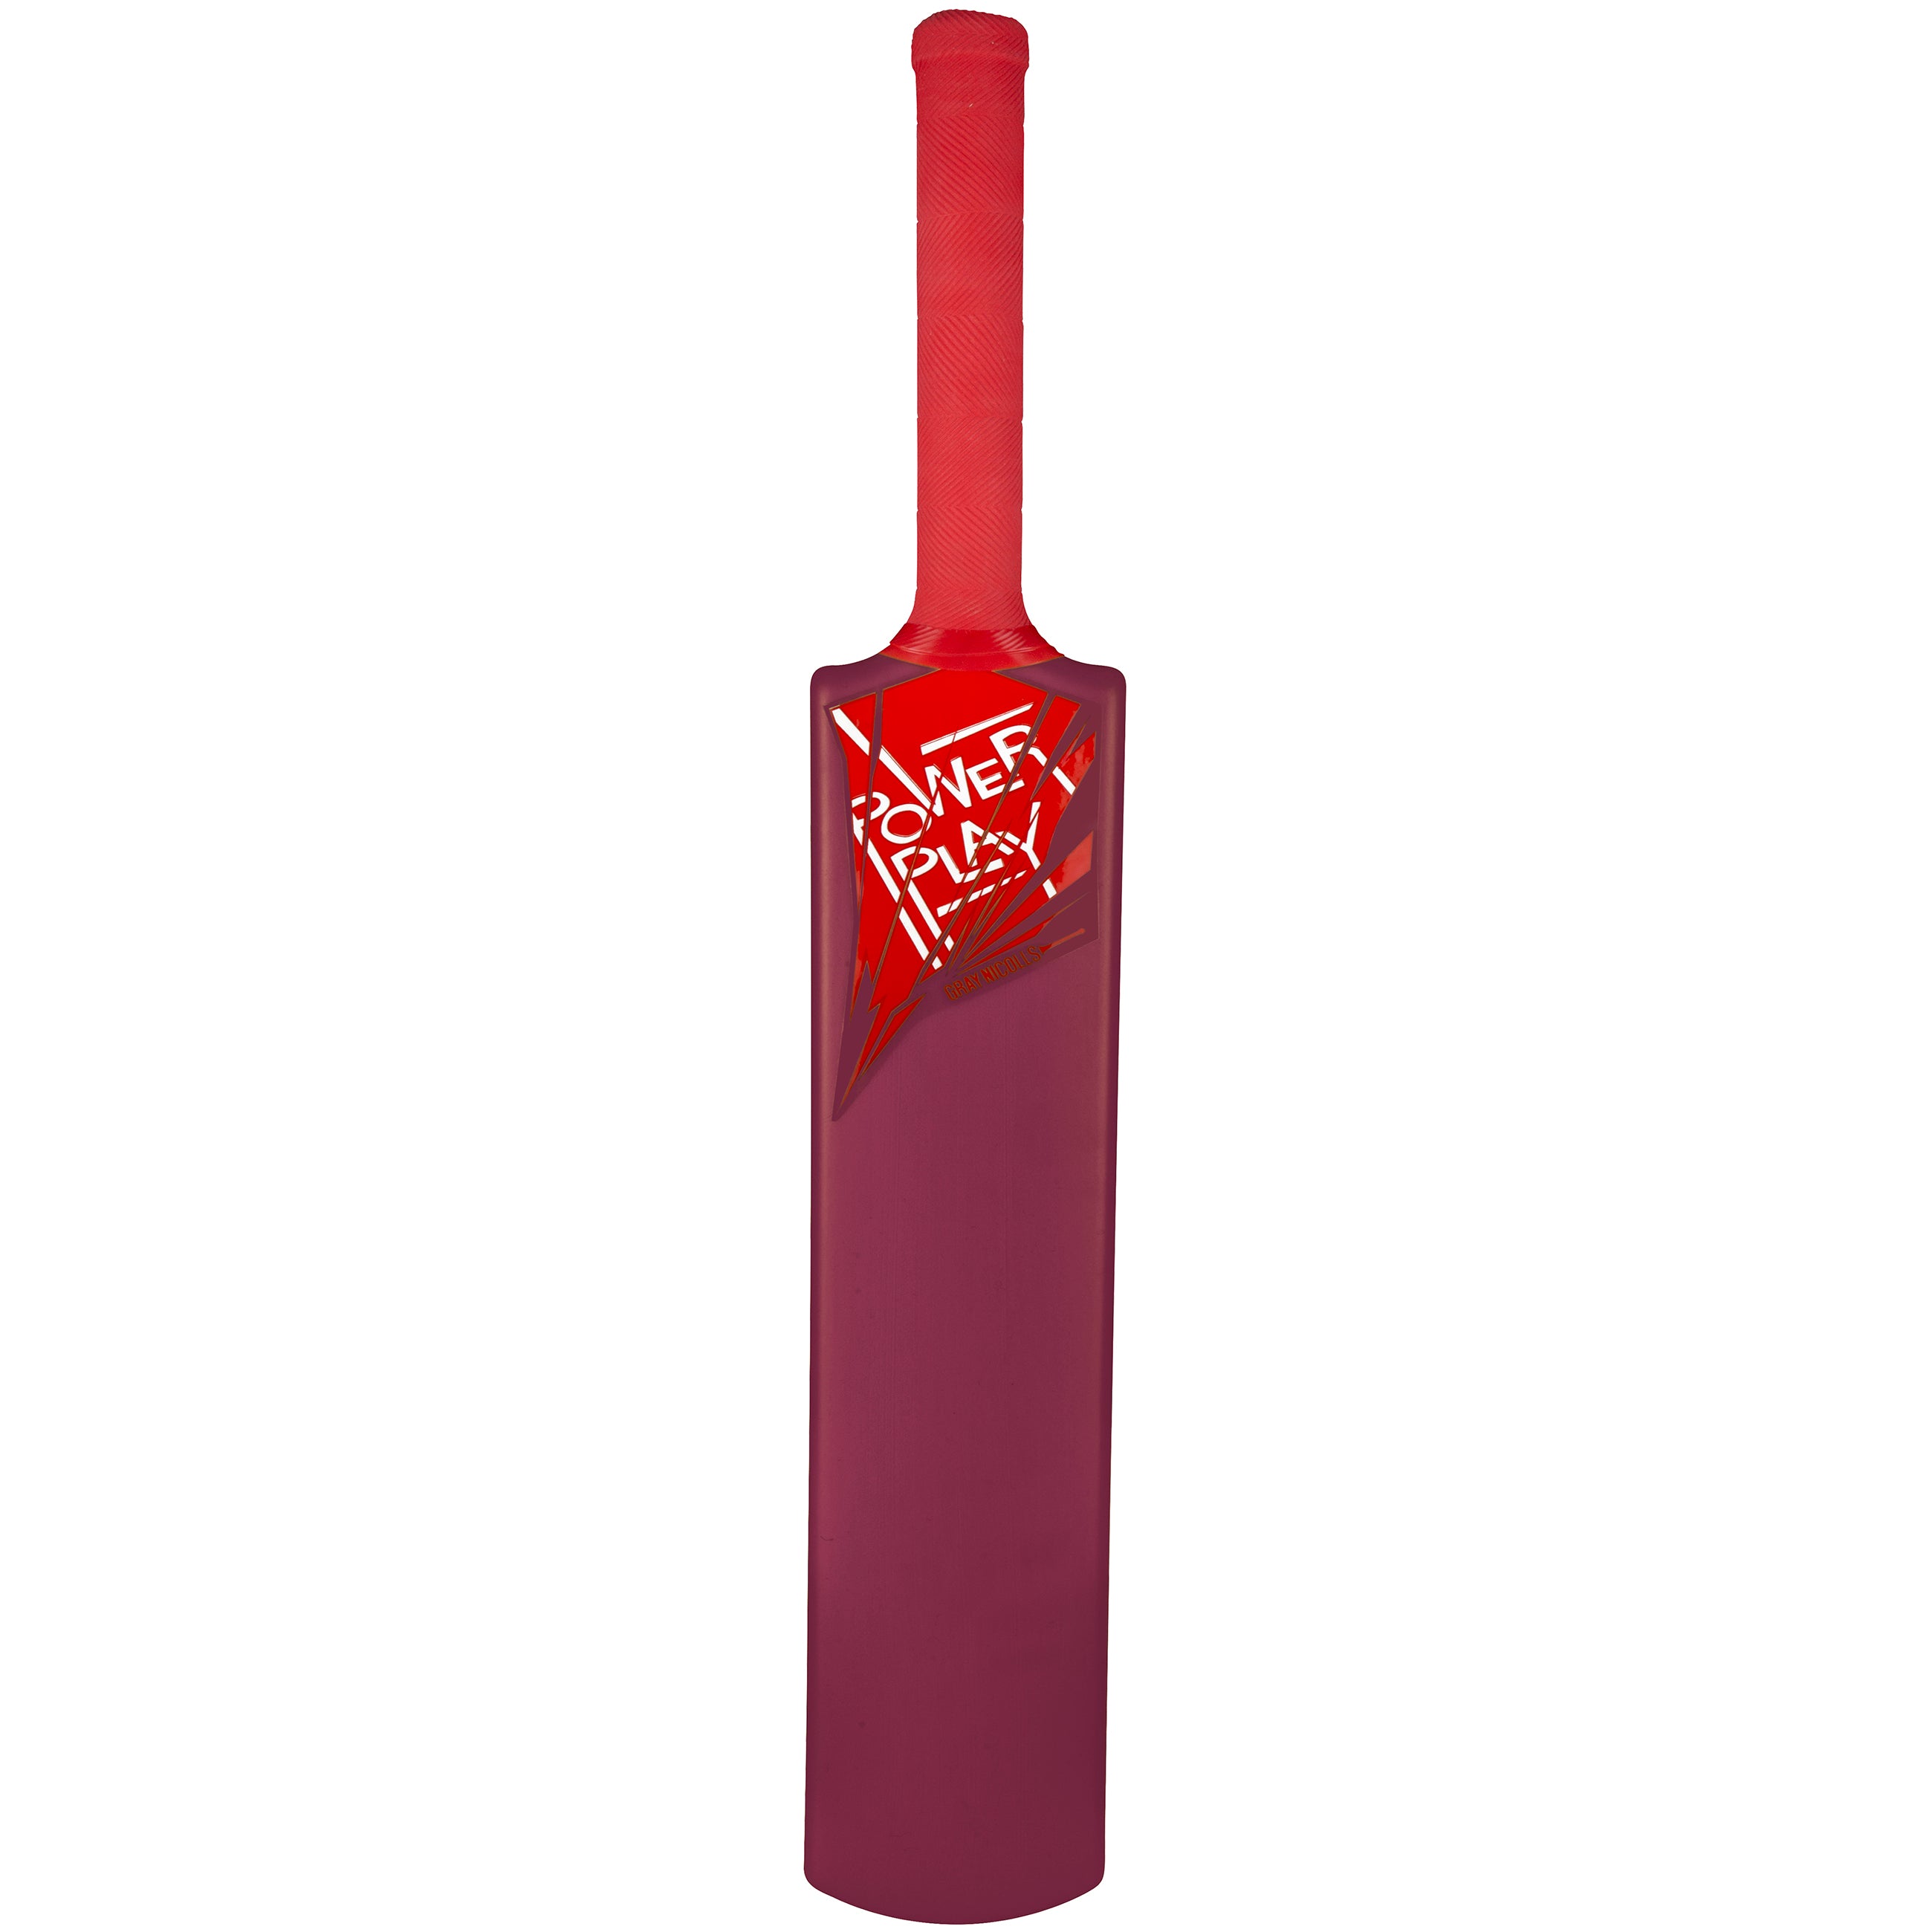 2600 CNBA20 5802554 Plastic Power Play Bat Maroon Size 0 Front